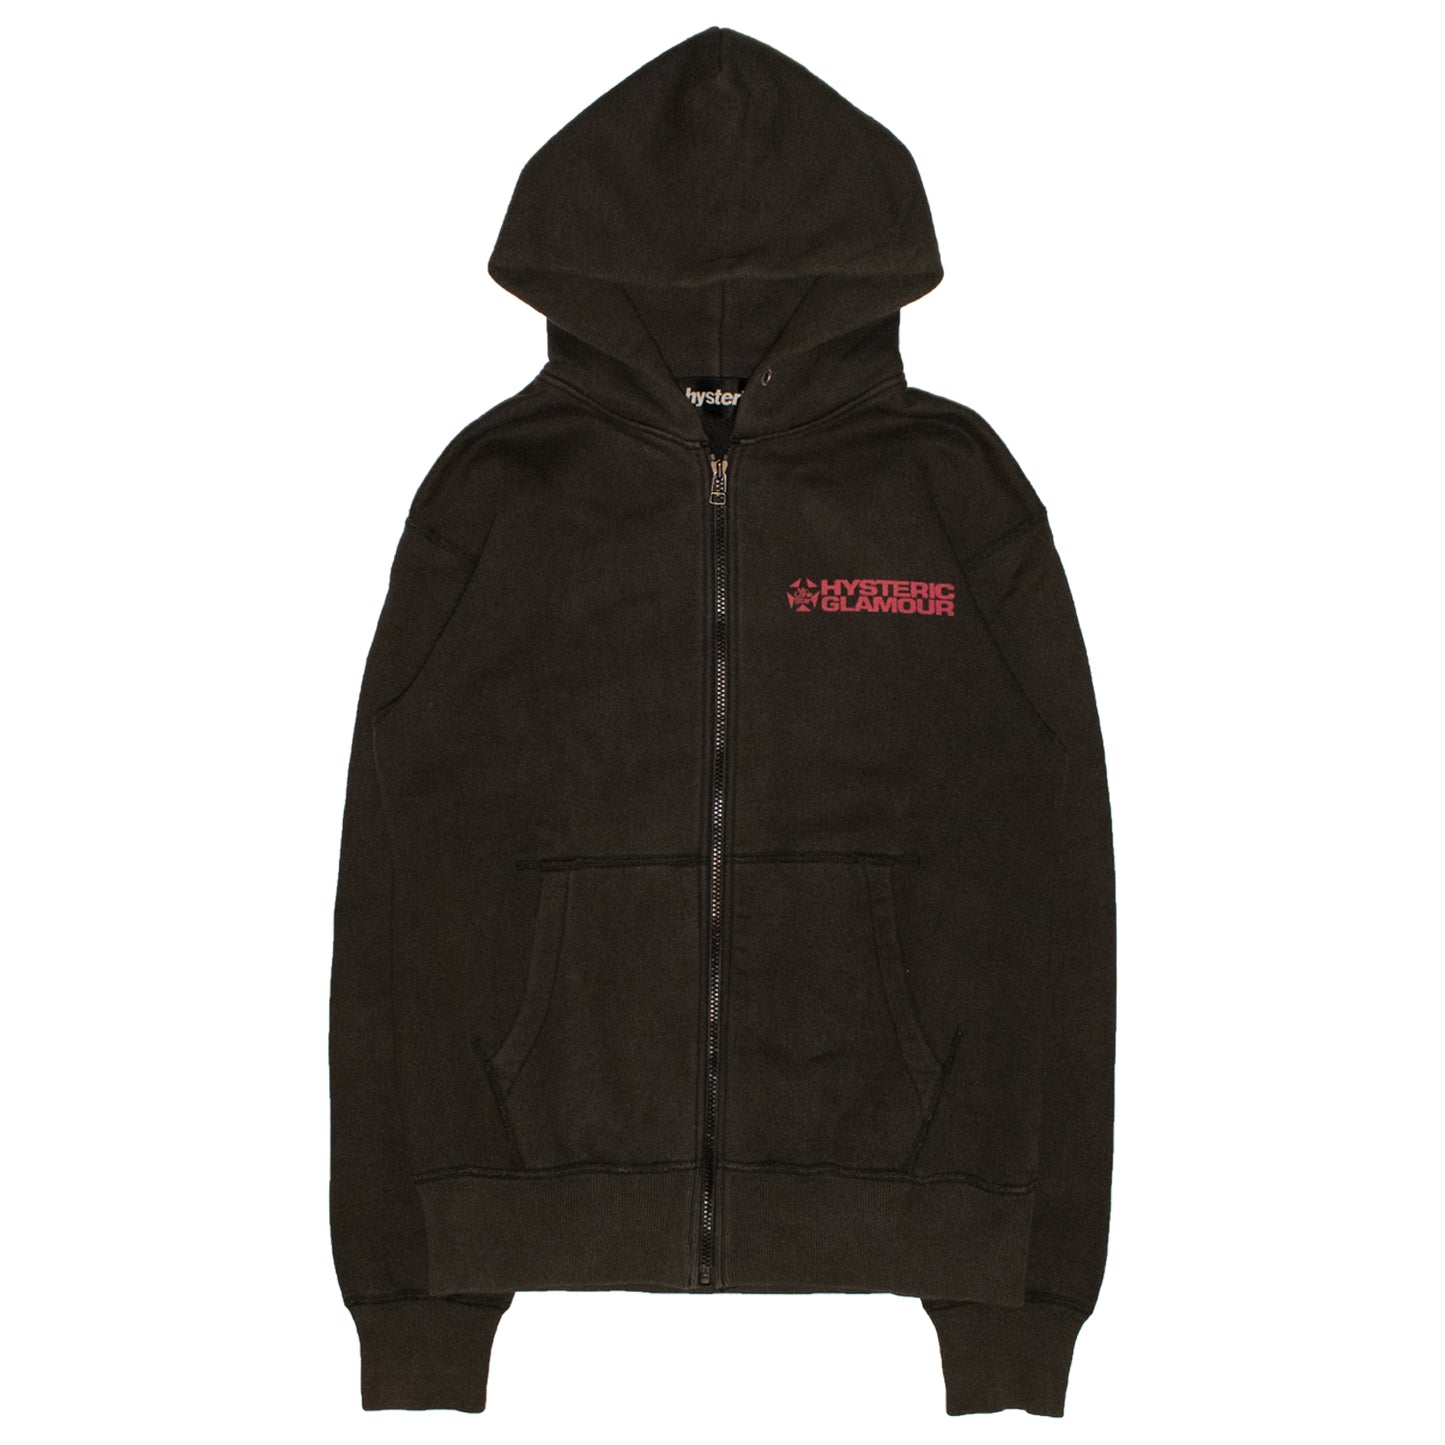 Hysteric Glamour Racing Engines Zip-Up Hoodie